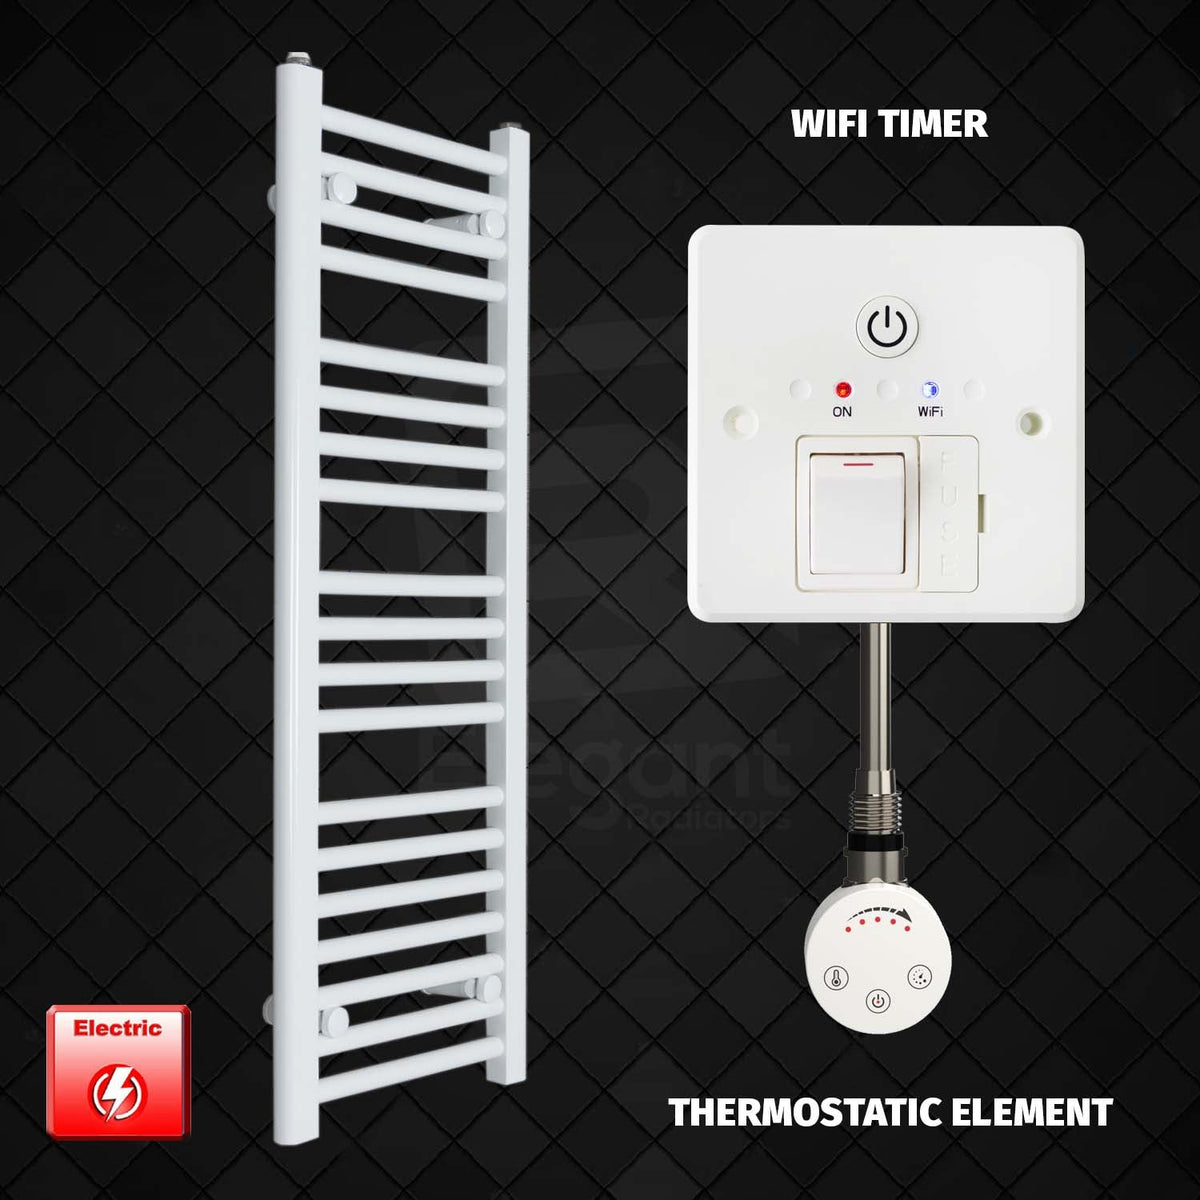 1000 mm High 300 mm Wide Pre-Filled Electric Heated Towel Rail Radiator White Smart Wifi Timer Thermostatic Element